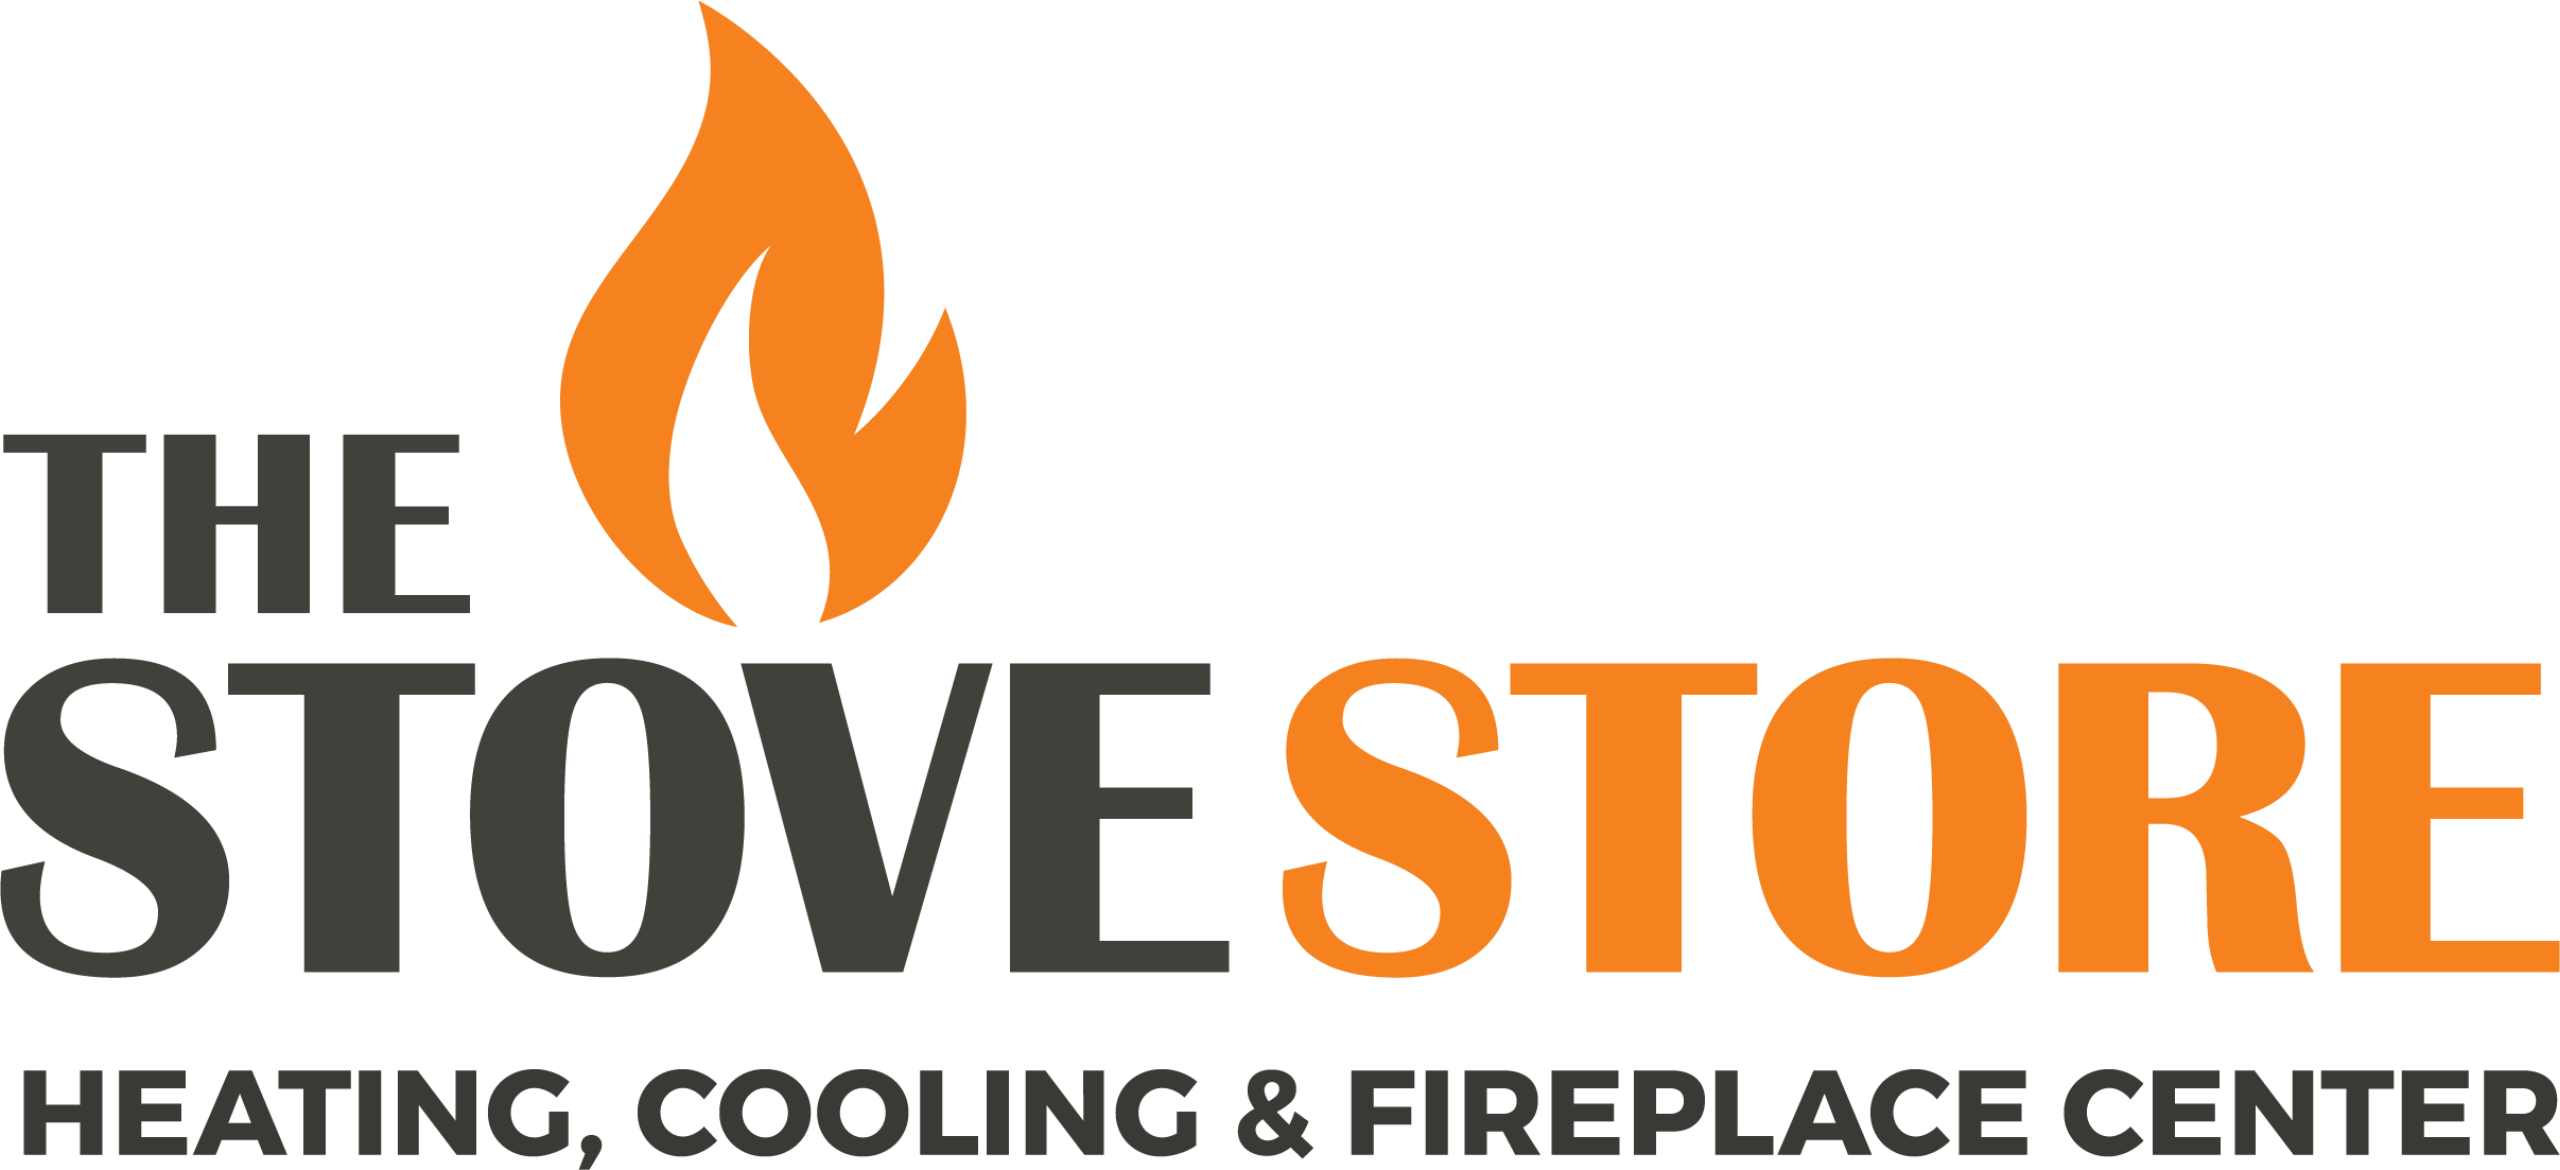 The Stove Store Logo